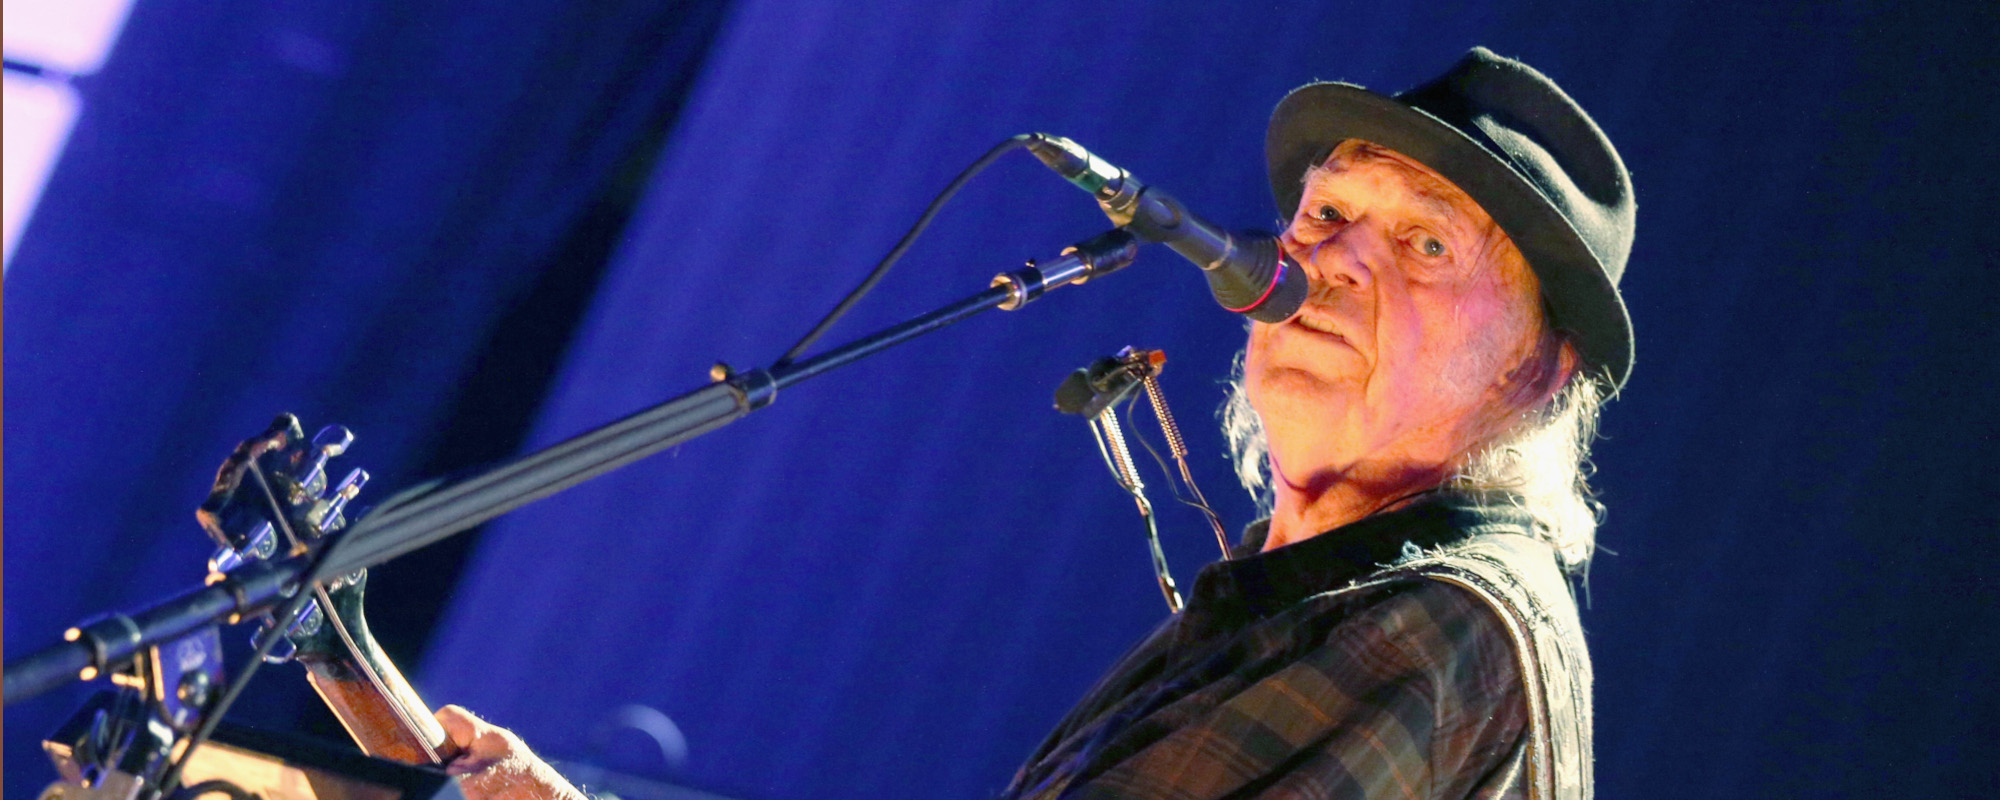 The Meaning Behind Neil Young’s Devastating “The Needle and the Damage Done”